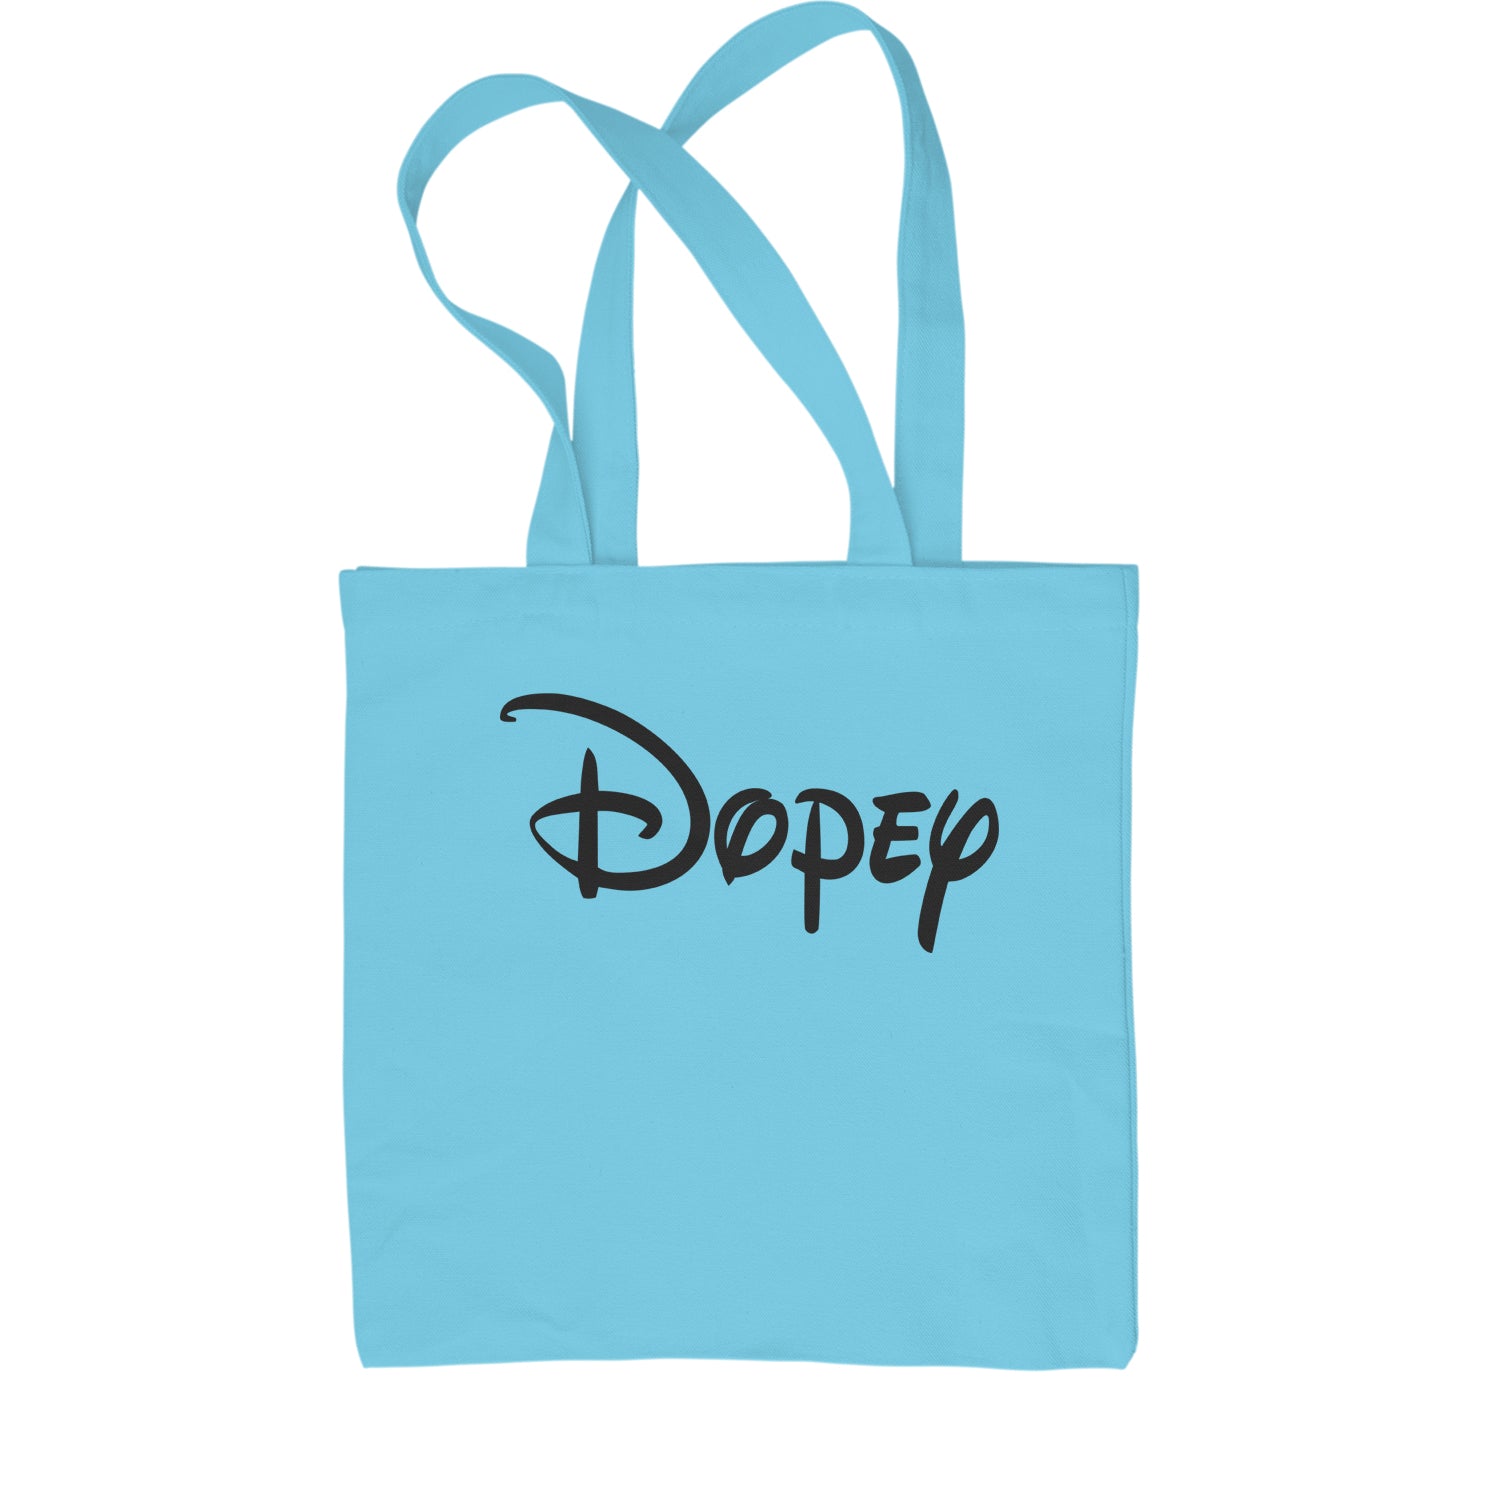 Dopey - 7 Dwarfs Costume Shopping Tote Bag and, costume, dwarfs, group, halloween, matching, seven, snow, the, white by Expression Tees